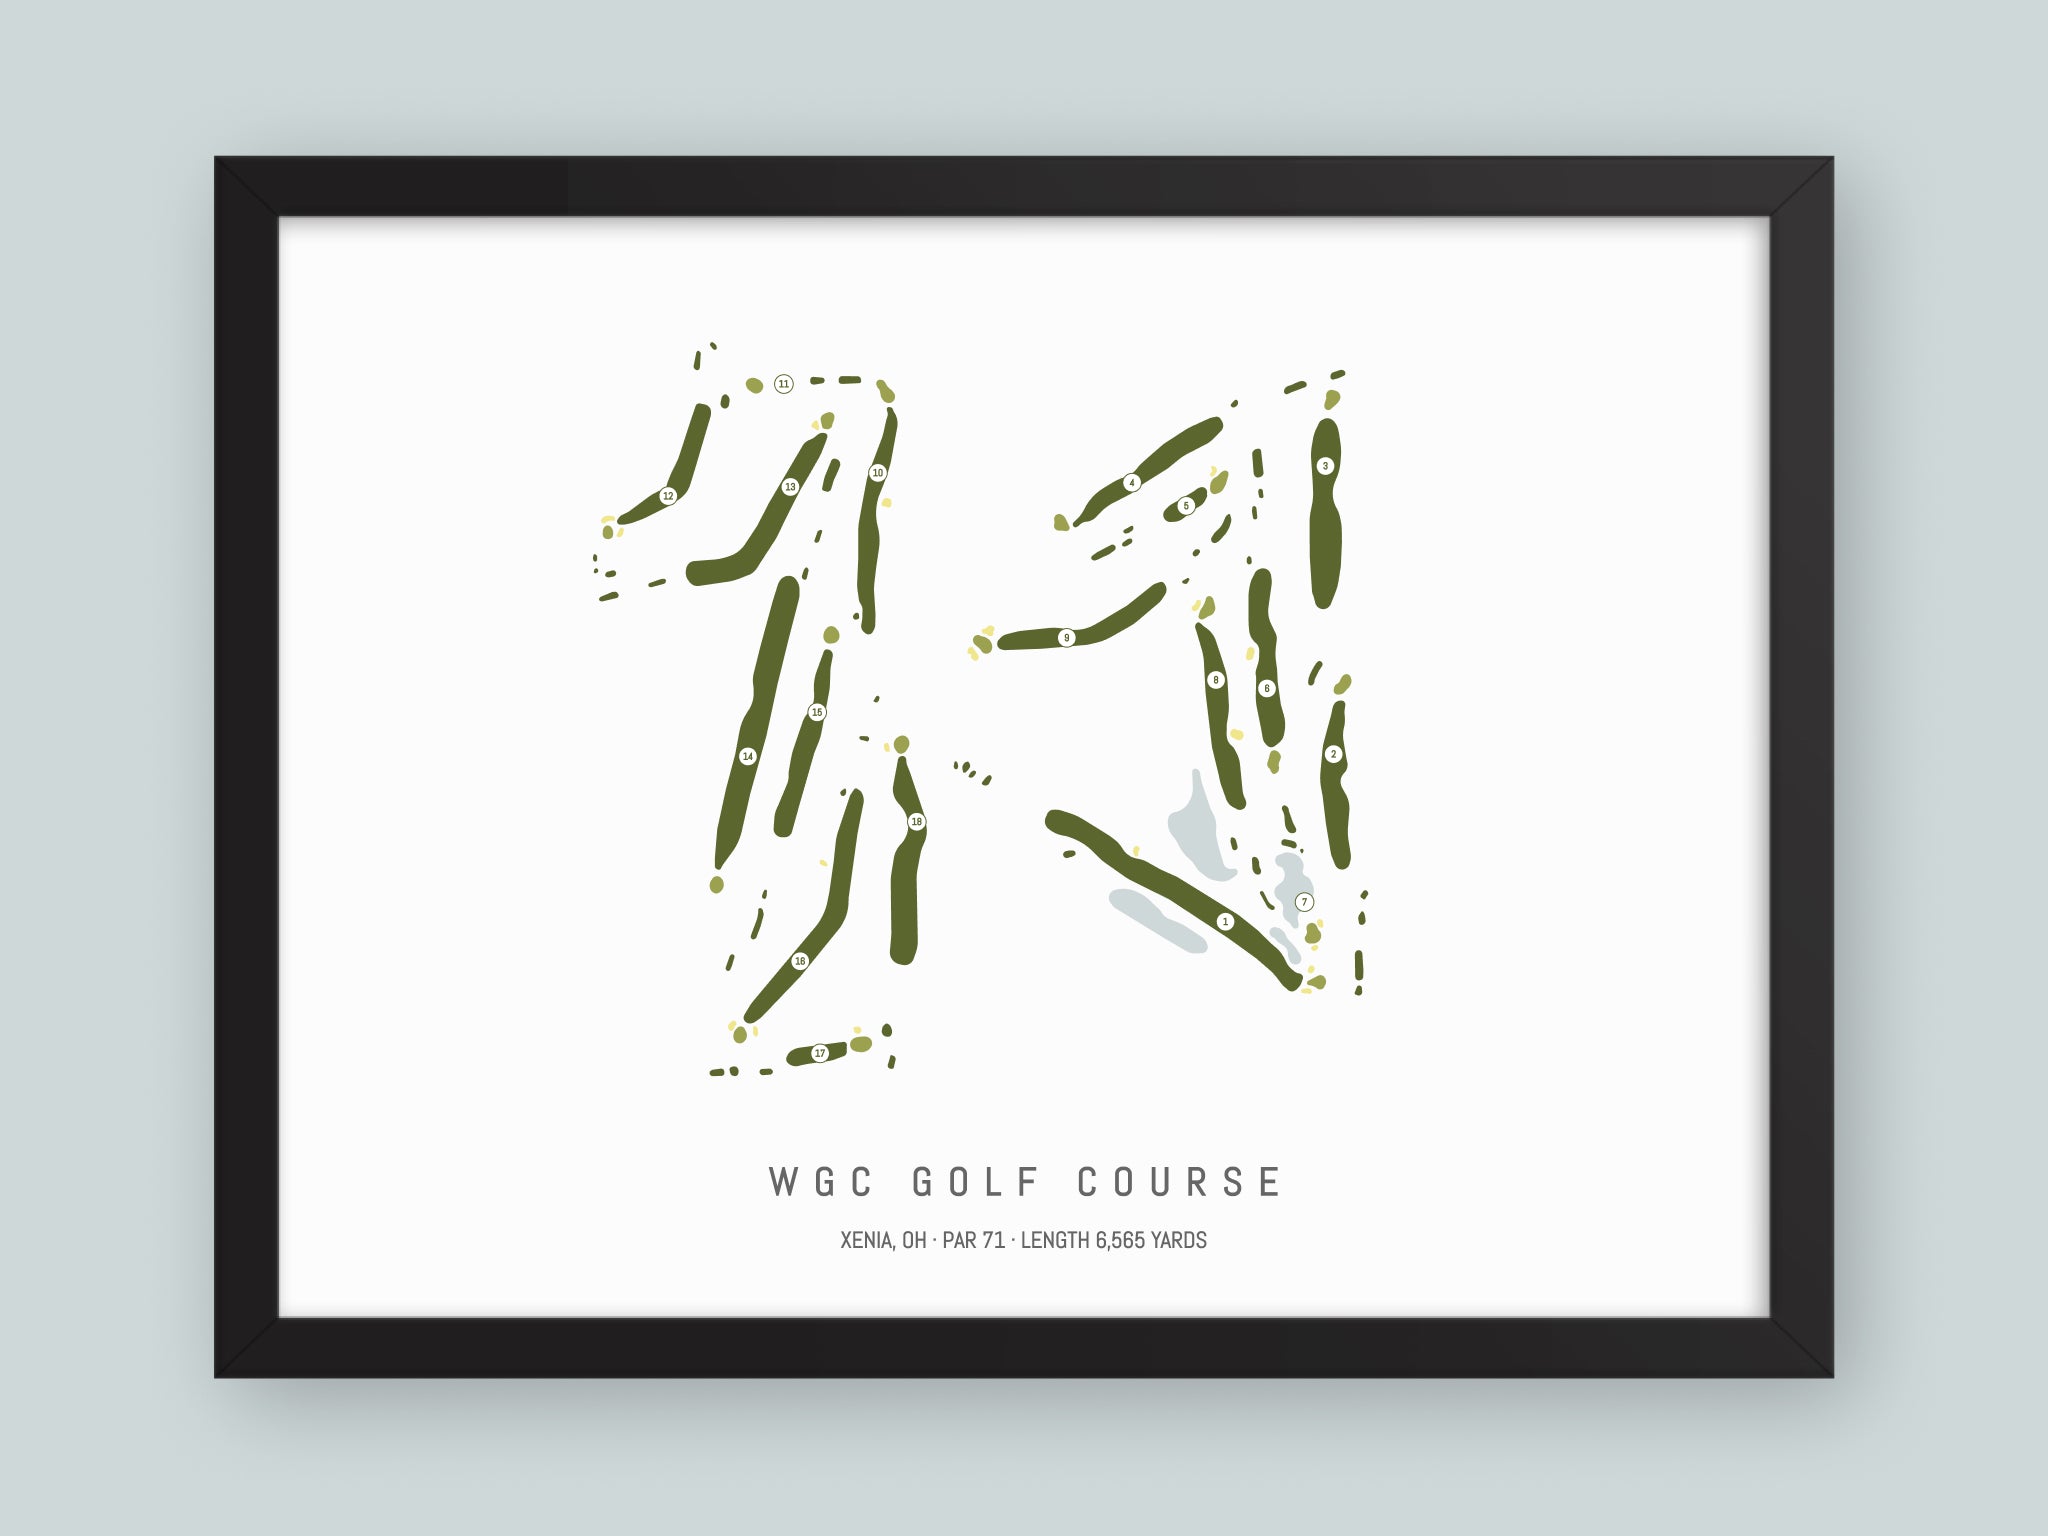 WGC-Golf-Course-OH--Black-Frame-24x18-With-Hole-Numbers